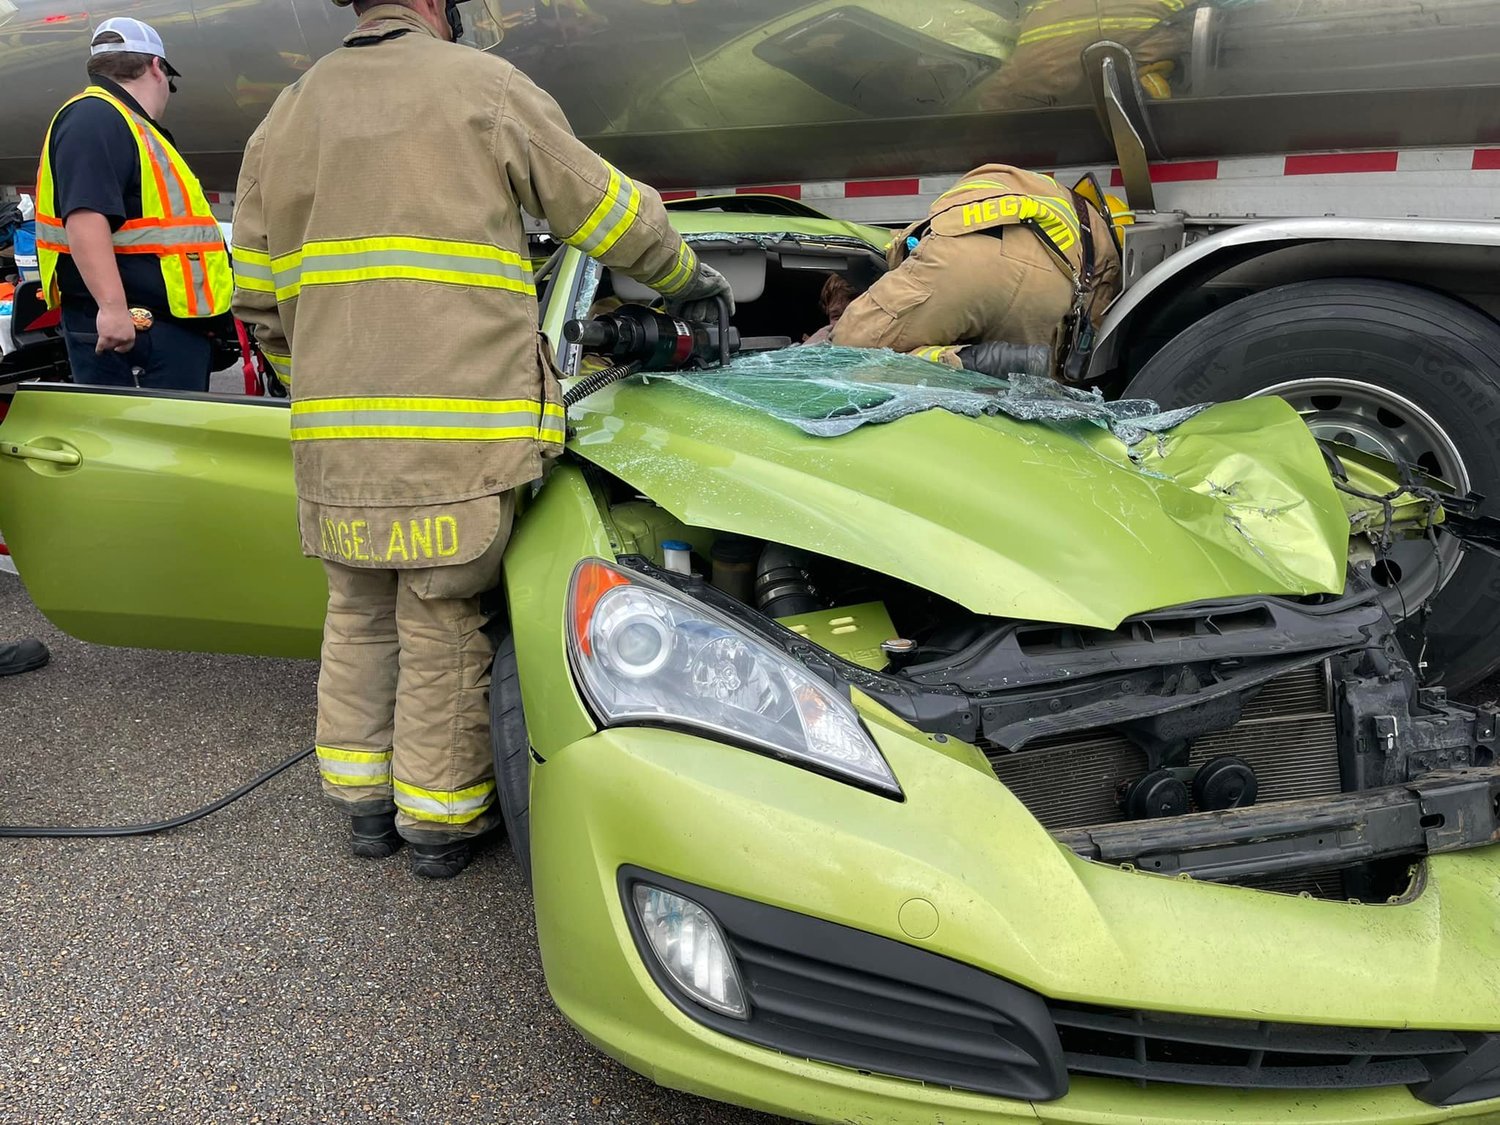 Ridgeland firefighters work to extricate a person trapped under a gasoline tanker Tuesday afternoon on I-55. After what was described as a “very tedious extrication,” the driver was removed and transported to University Mississippi Medical Center, officials said, and only suffered minor injuries.